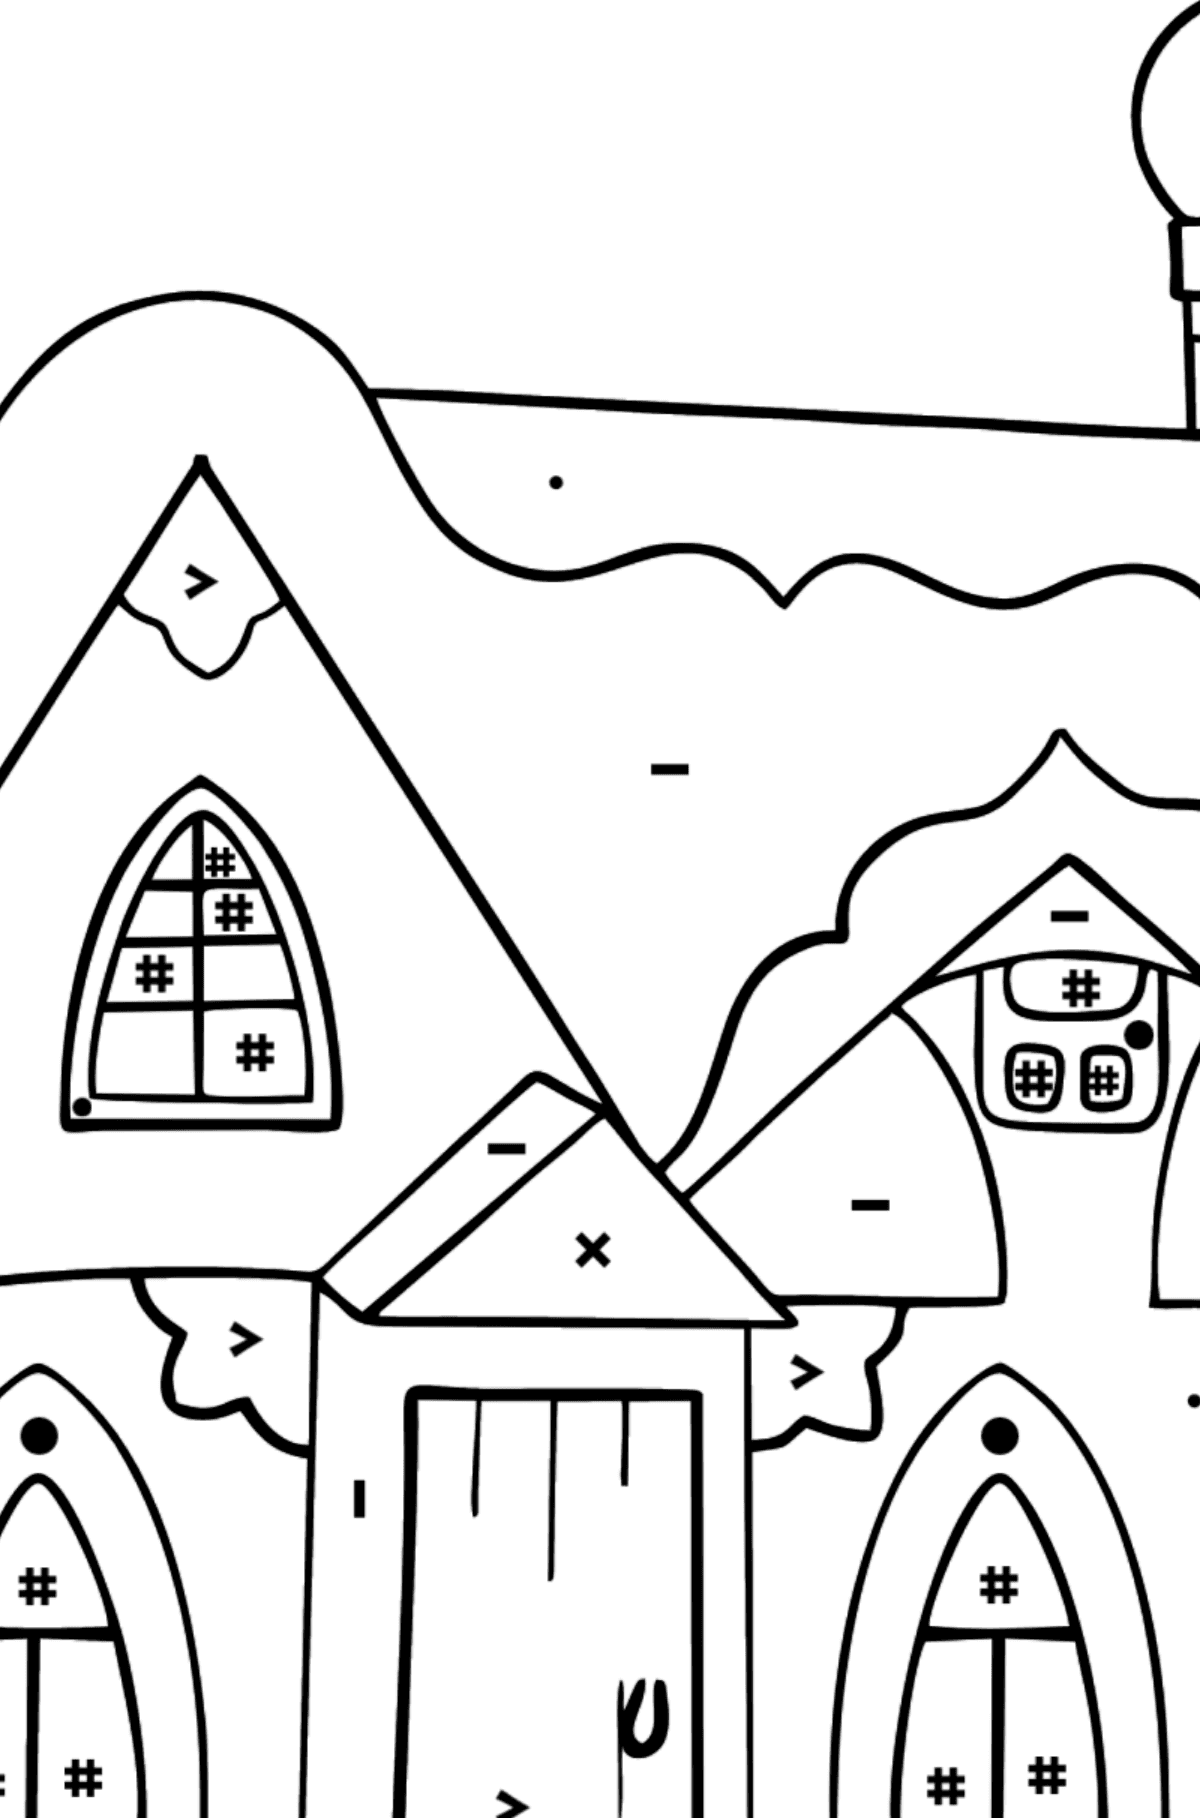 Complex Coloring Page - A Fairytale House - Coloring by Symbols for Kids